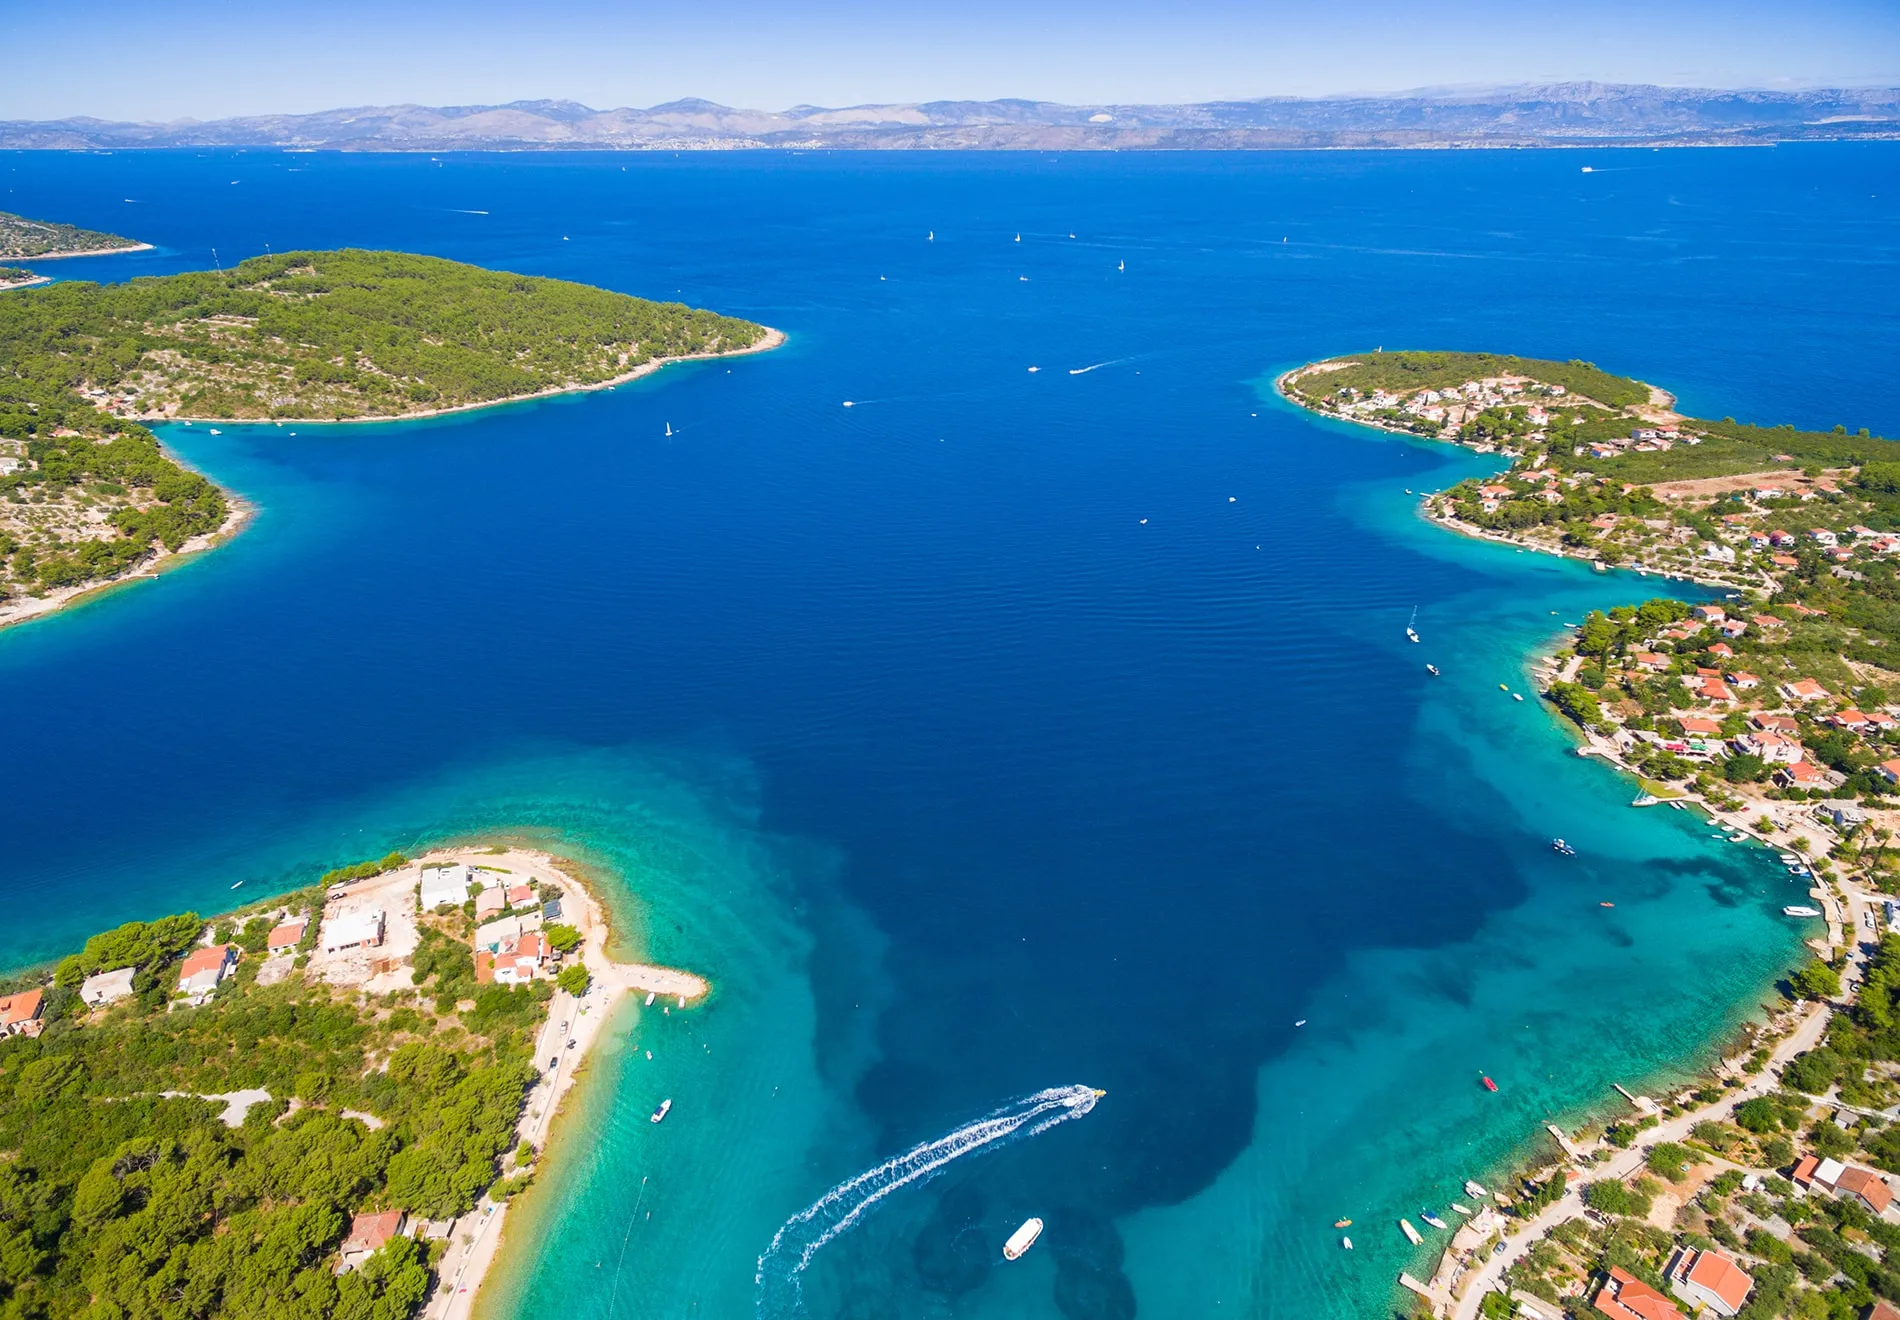 Which excursions or tours in Croatia do you recommend to your guests